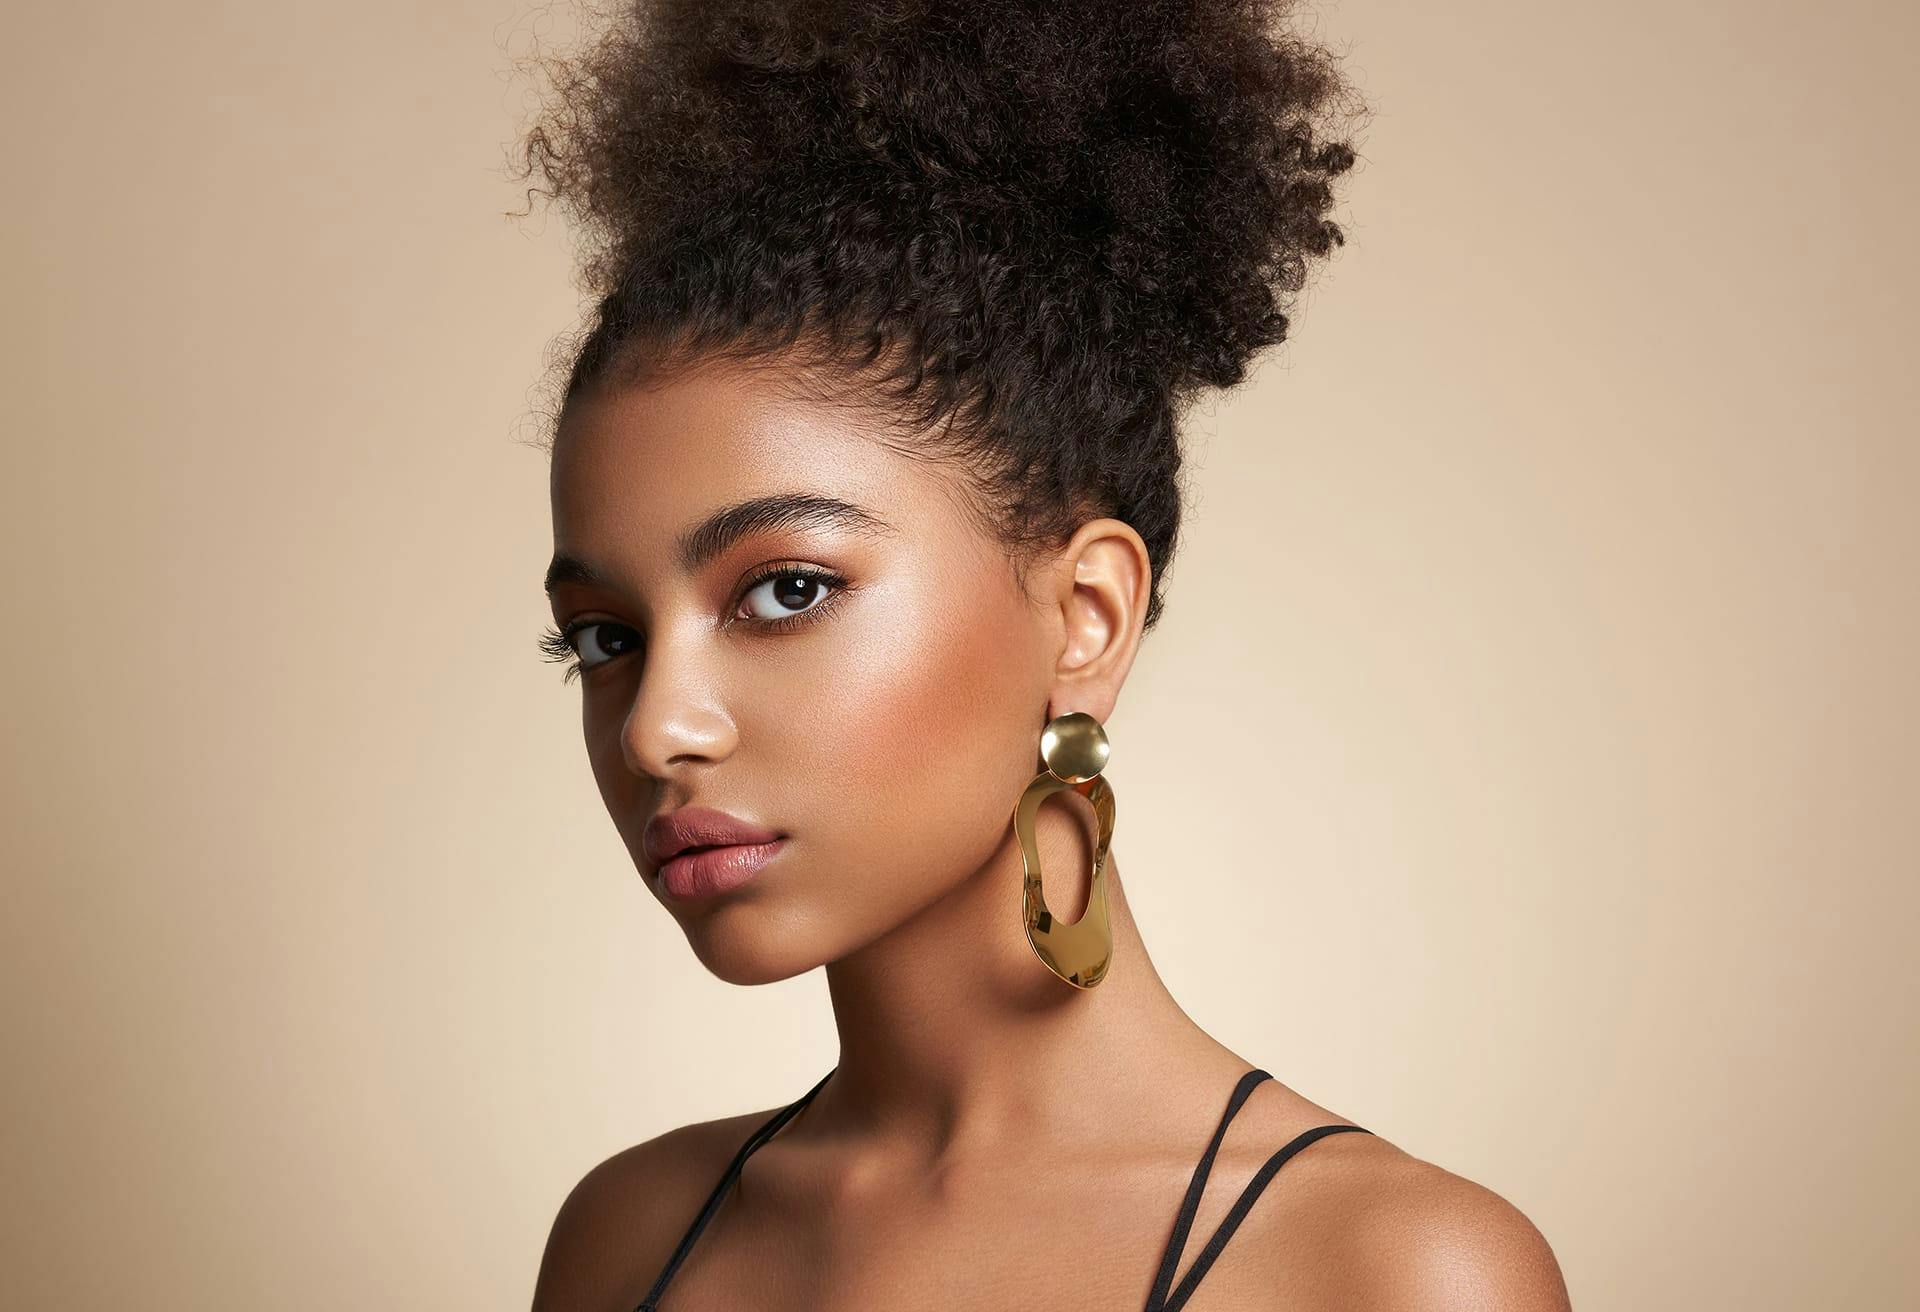 Beautiful woman wearing big gold earrings with her curly hair in an updo